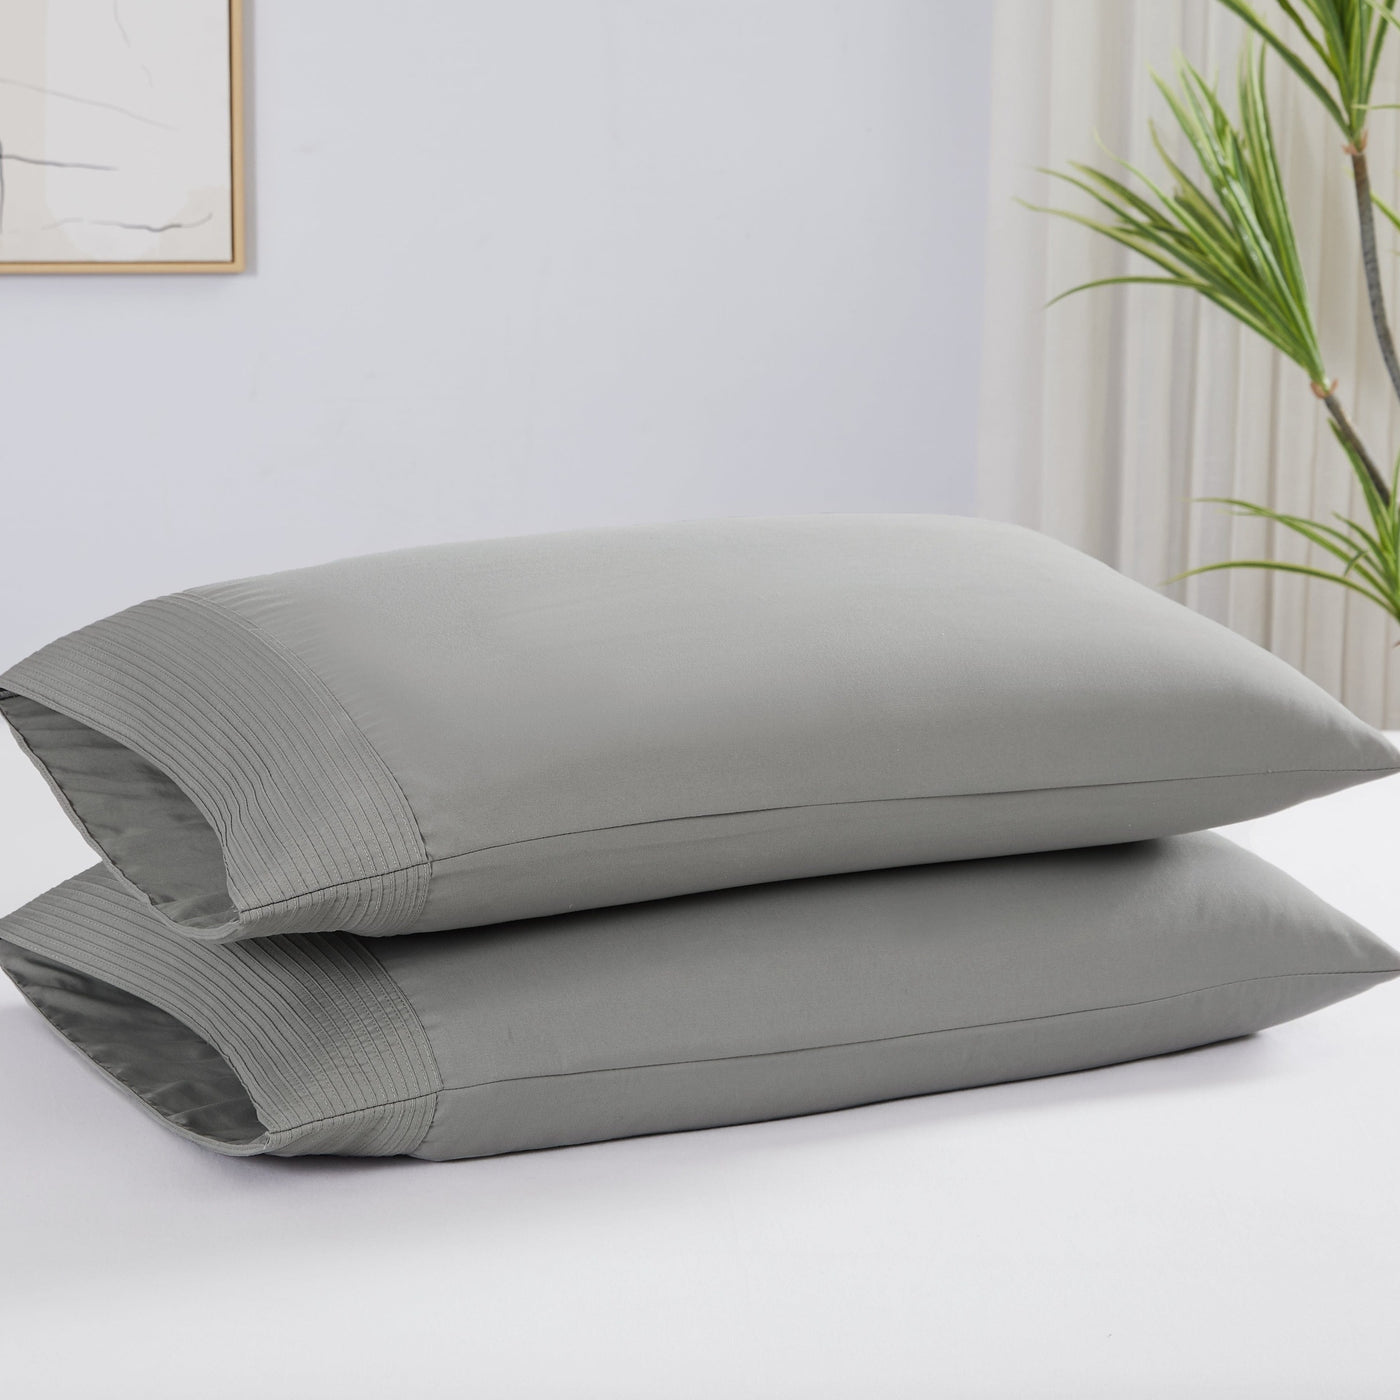 Two Vilano Pleated Pillow Cases in Steel Grey Stack Together#color_vilano-steel-gray